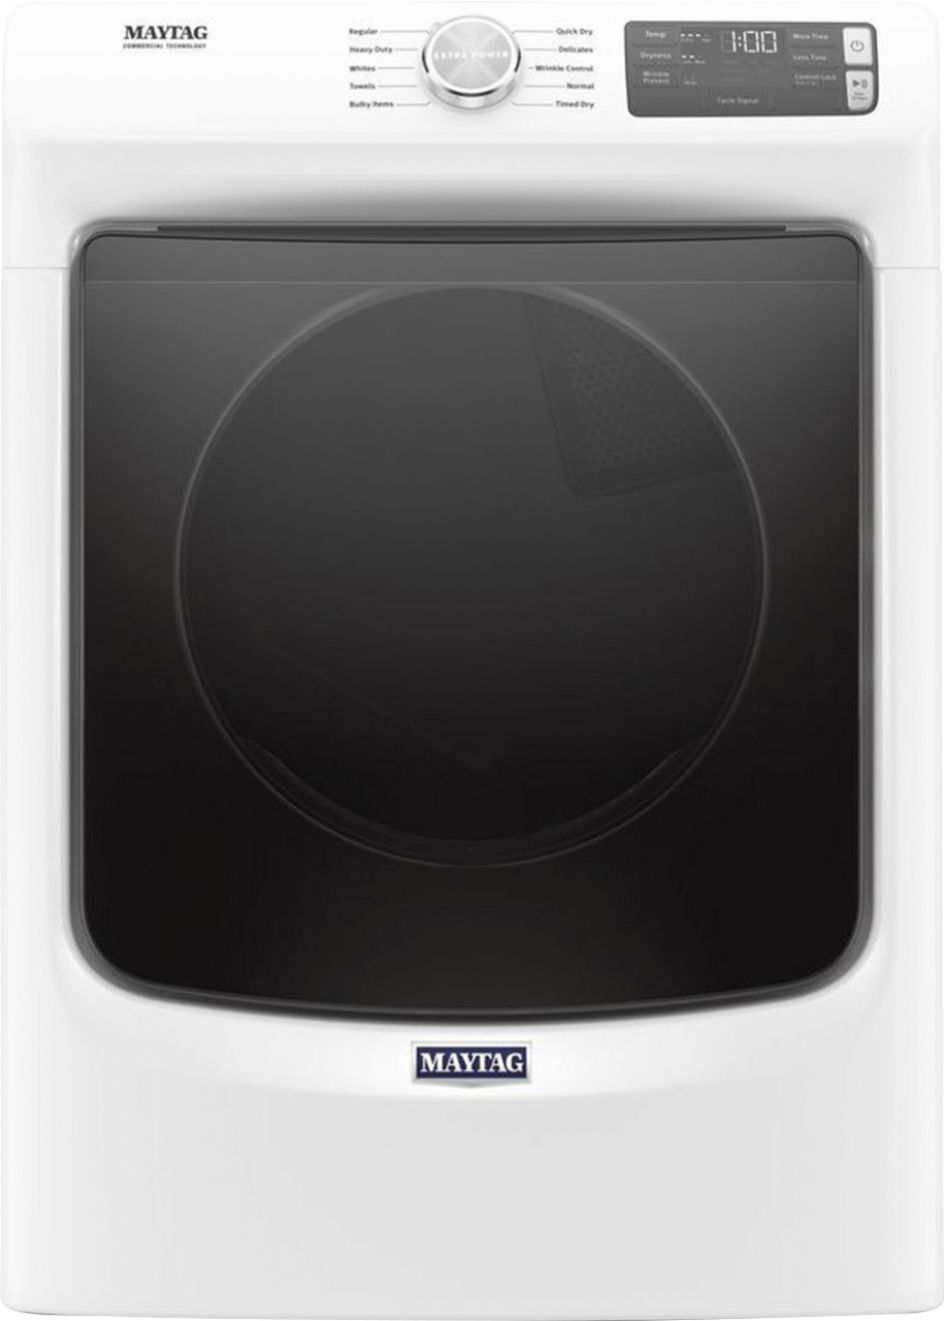 User manual Maytag MGD5630HW 27 Inch Gas Dryer with 7.3 cu. ft. Capacity